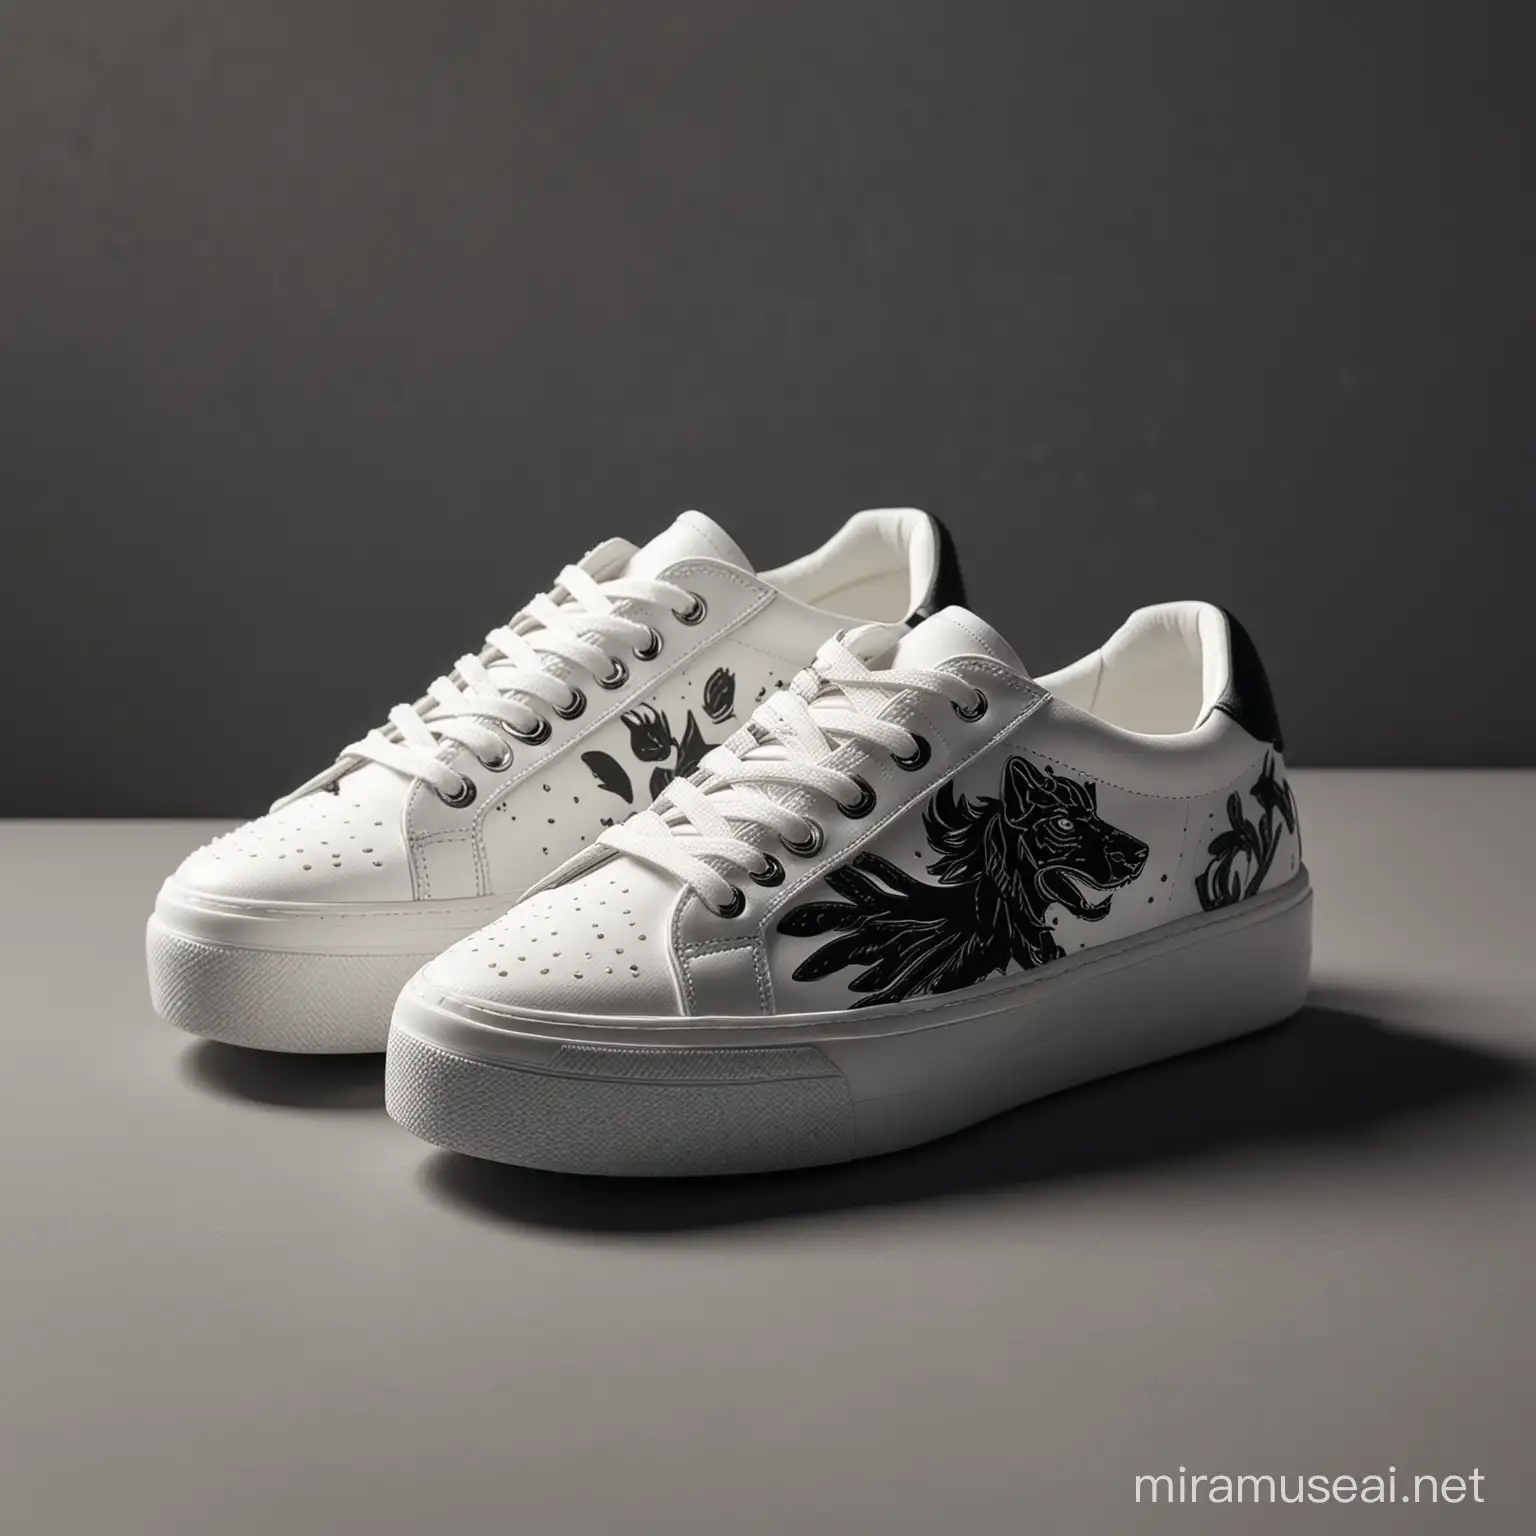 White sneakers with black animal designs. The sneakers are on a table. Cinematic lighting, hyperealistic product design photography.